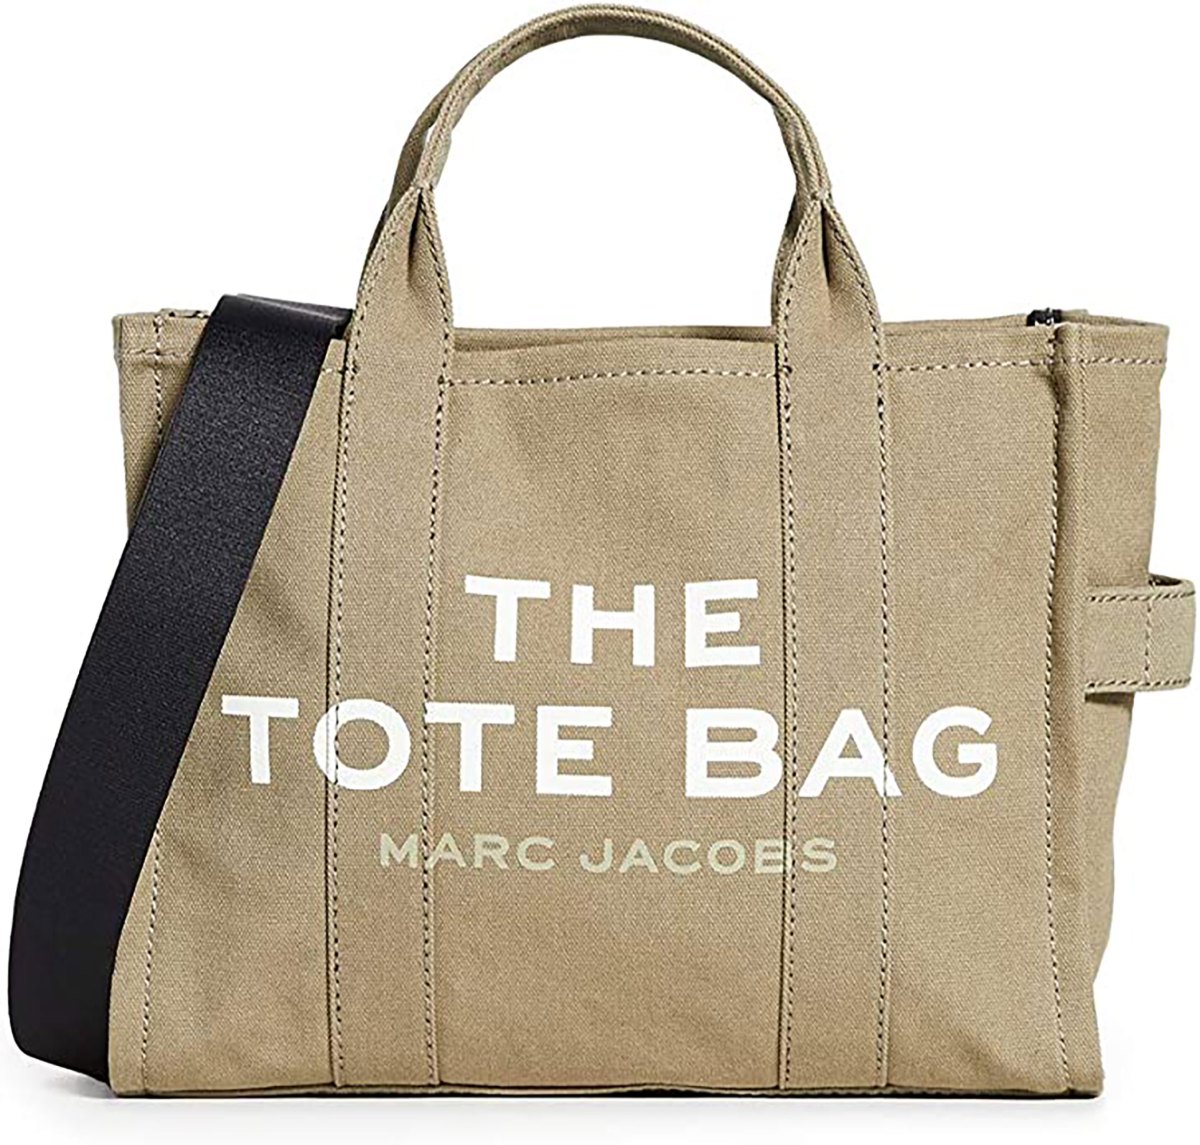 Carry in Style: How to Rock a Marc Jacobs Tote Bag Like a Celebrity